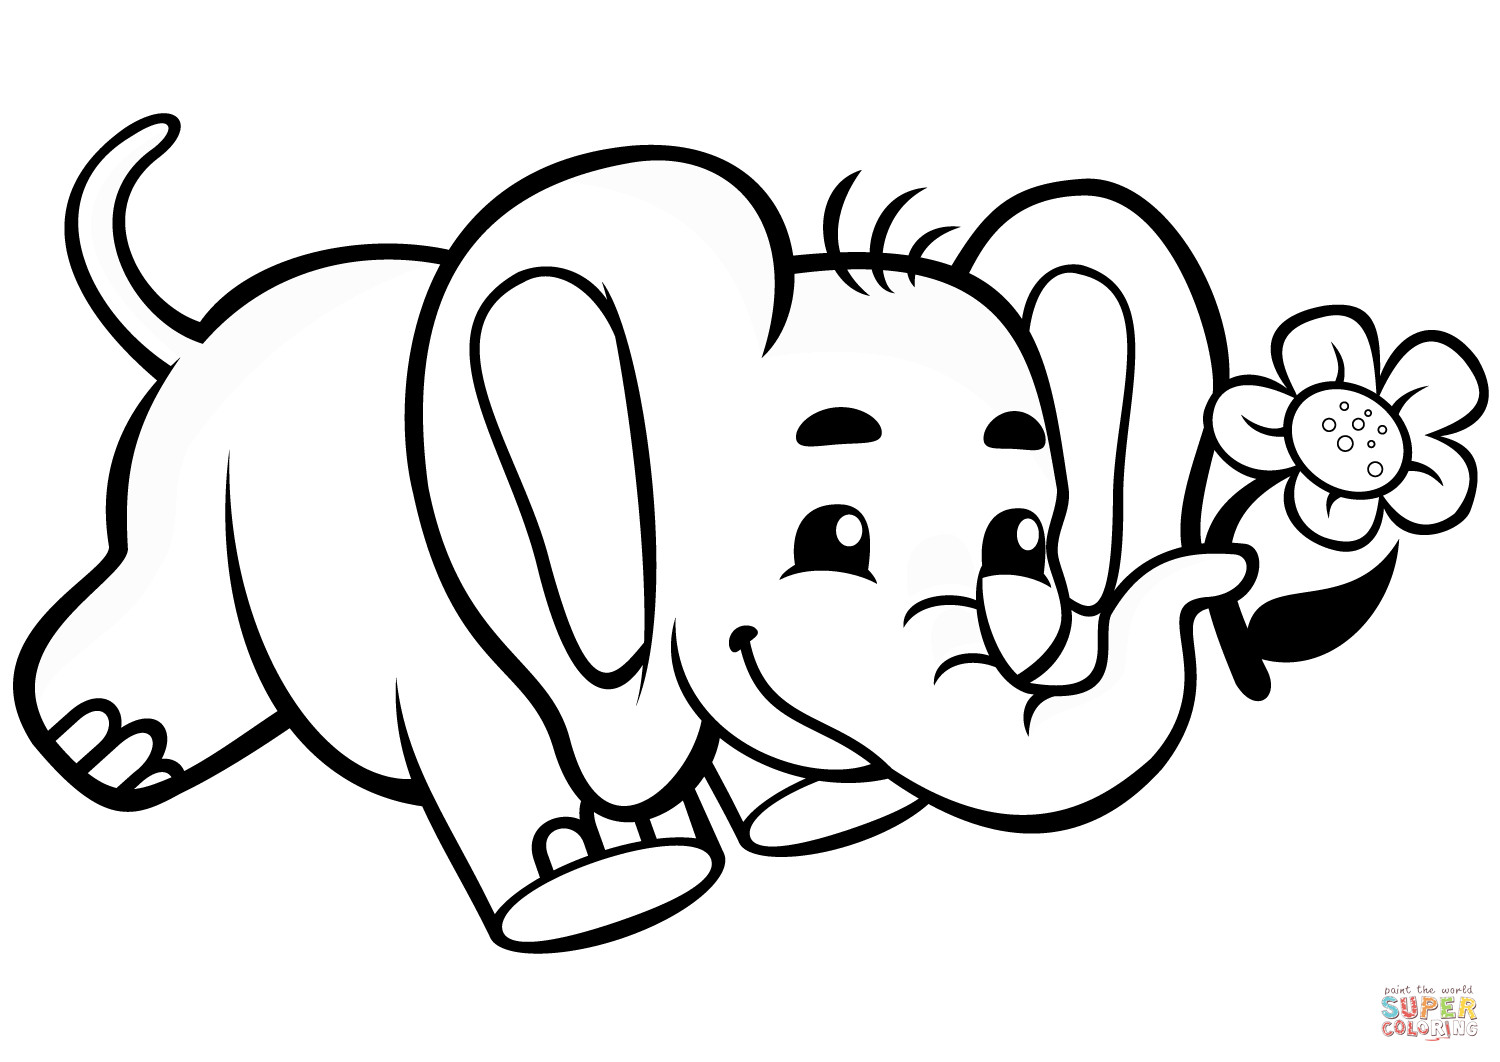 Cute Baby Elephant Coloring Pages
 Cute Baby Elephant with Flower coloring page